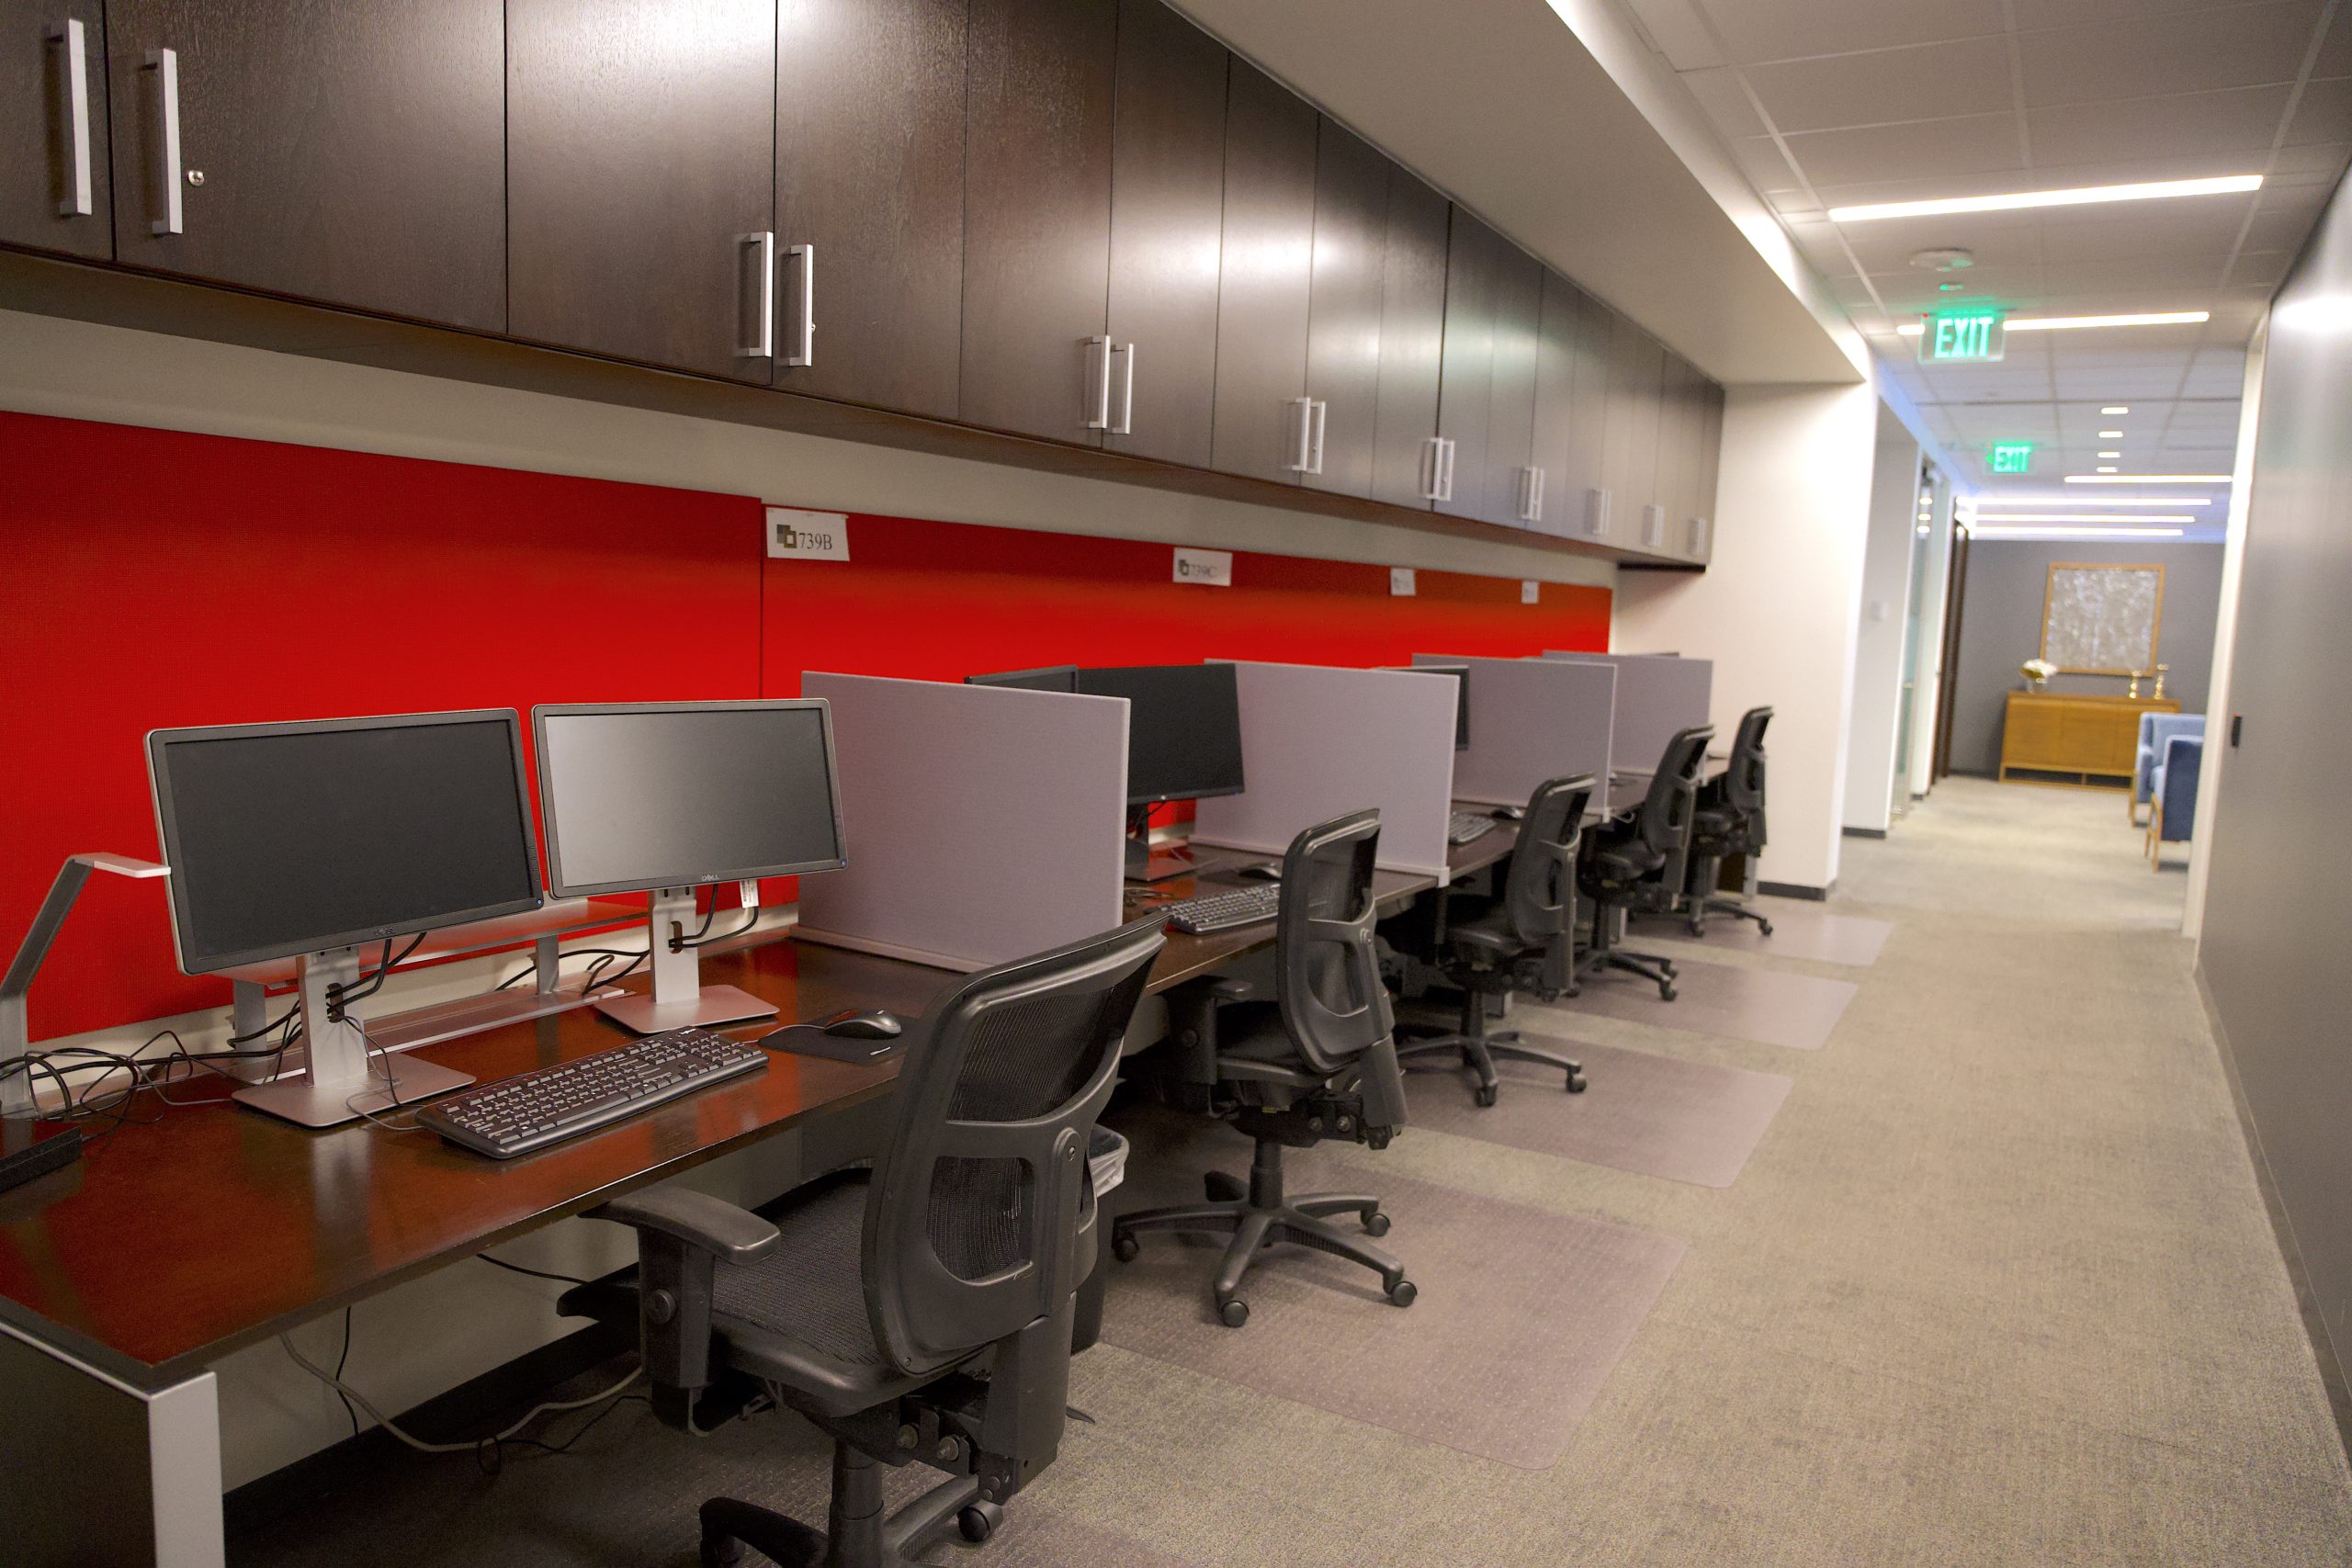 An office hallway with four desks and office chairs against one side with a red wall. Each desk is clean and has a keyboard and two monitors. 